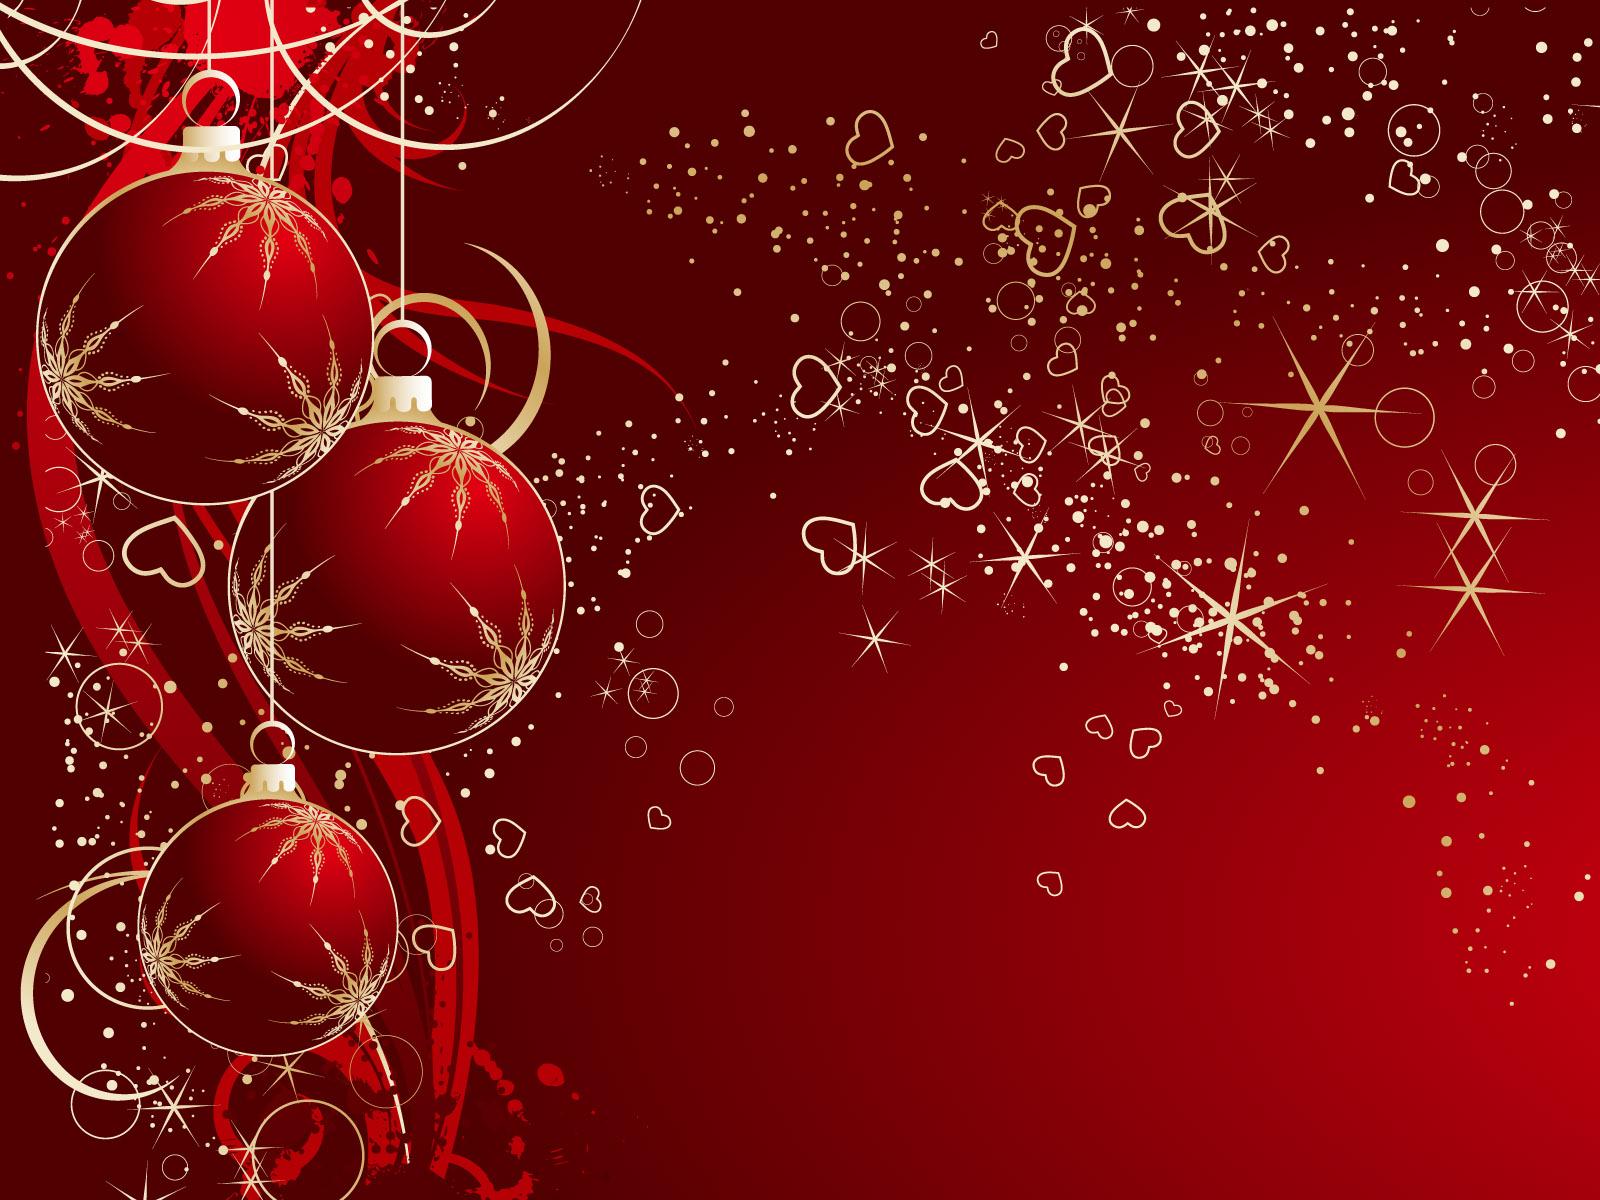 1600 x 1200 · jpeg - Abstract red and white Christmas wallpaper HD | Home of Wallpapers ...